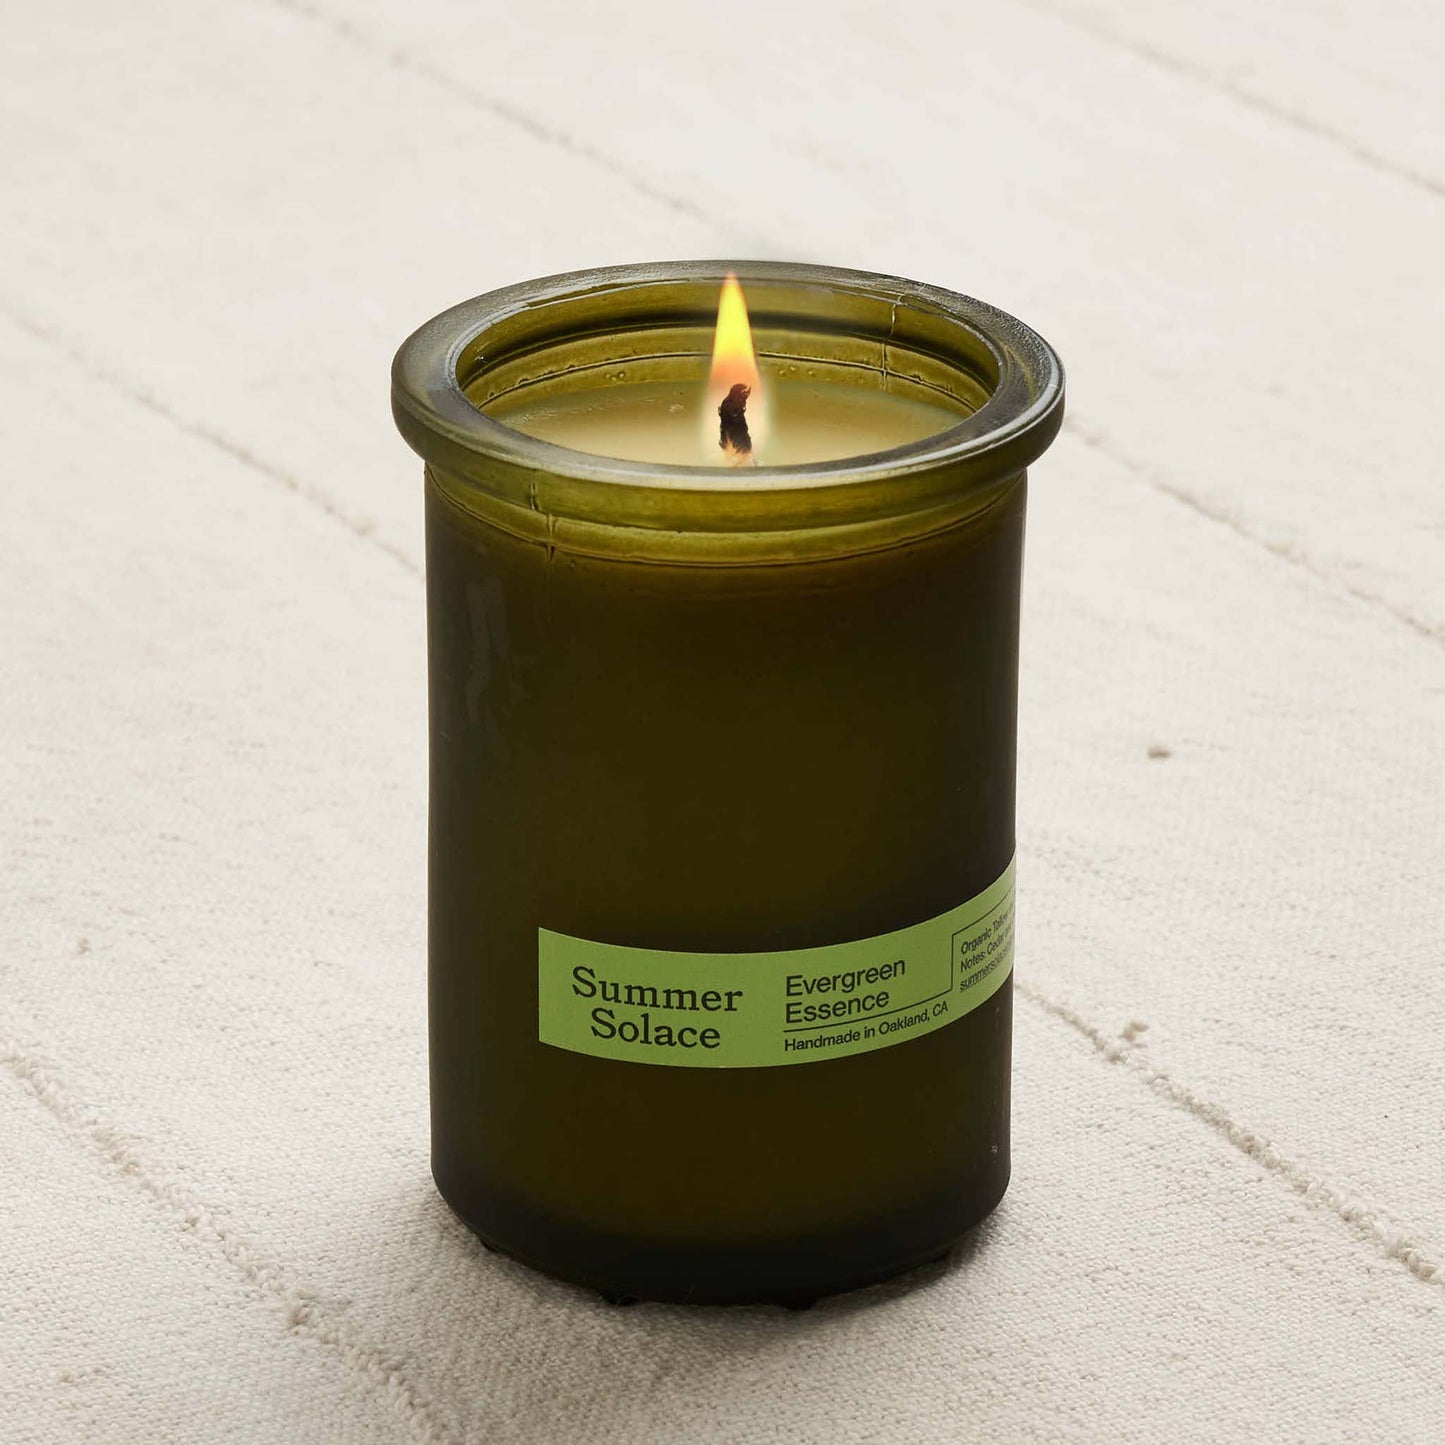 Botanica Beeswax Candle - 3-Wick  Essential oil scents, Beeswax